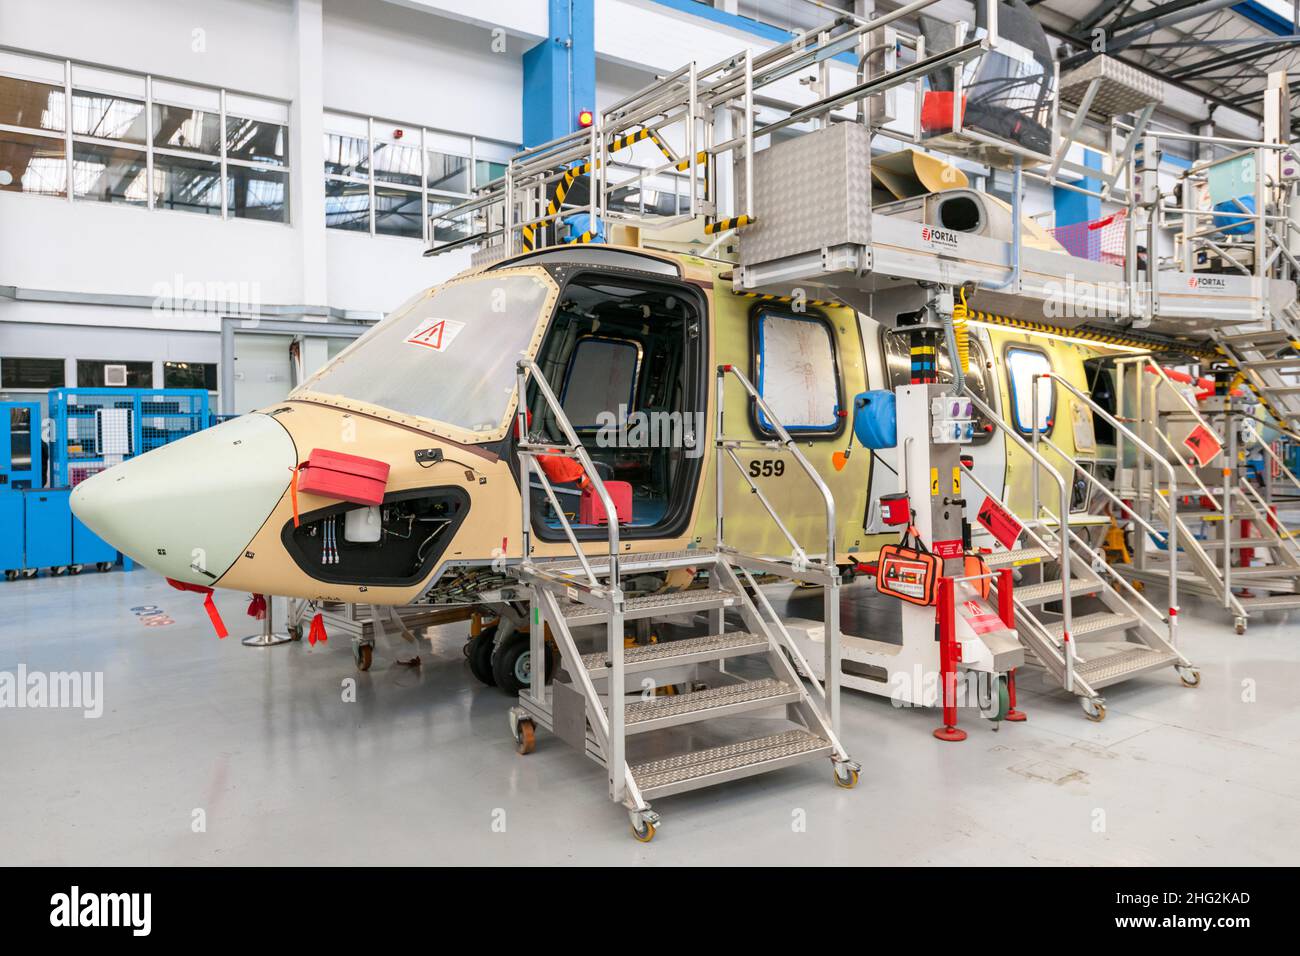 Marignane, France. 14th Jan, 2022. The new H160 model called ''Guepard'' seen on the assembly lines, at the Marignane plant.After the first deliveries and an official announcement by the French Minister of the Army, it will be operational in 2022. It is the first aircraft that covers all military requirements and has civilian variants. The new H160 model called ''Guepard'' on the assembly lines, in the Marignane plant. (Credit Image: © Laurent Coust/SOPA Images via ZUMA Press Wire) Stock Photo